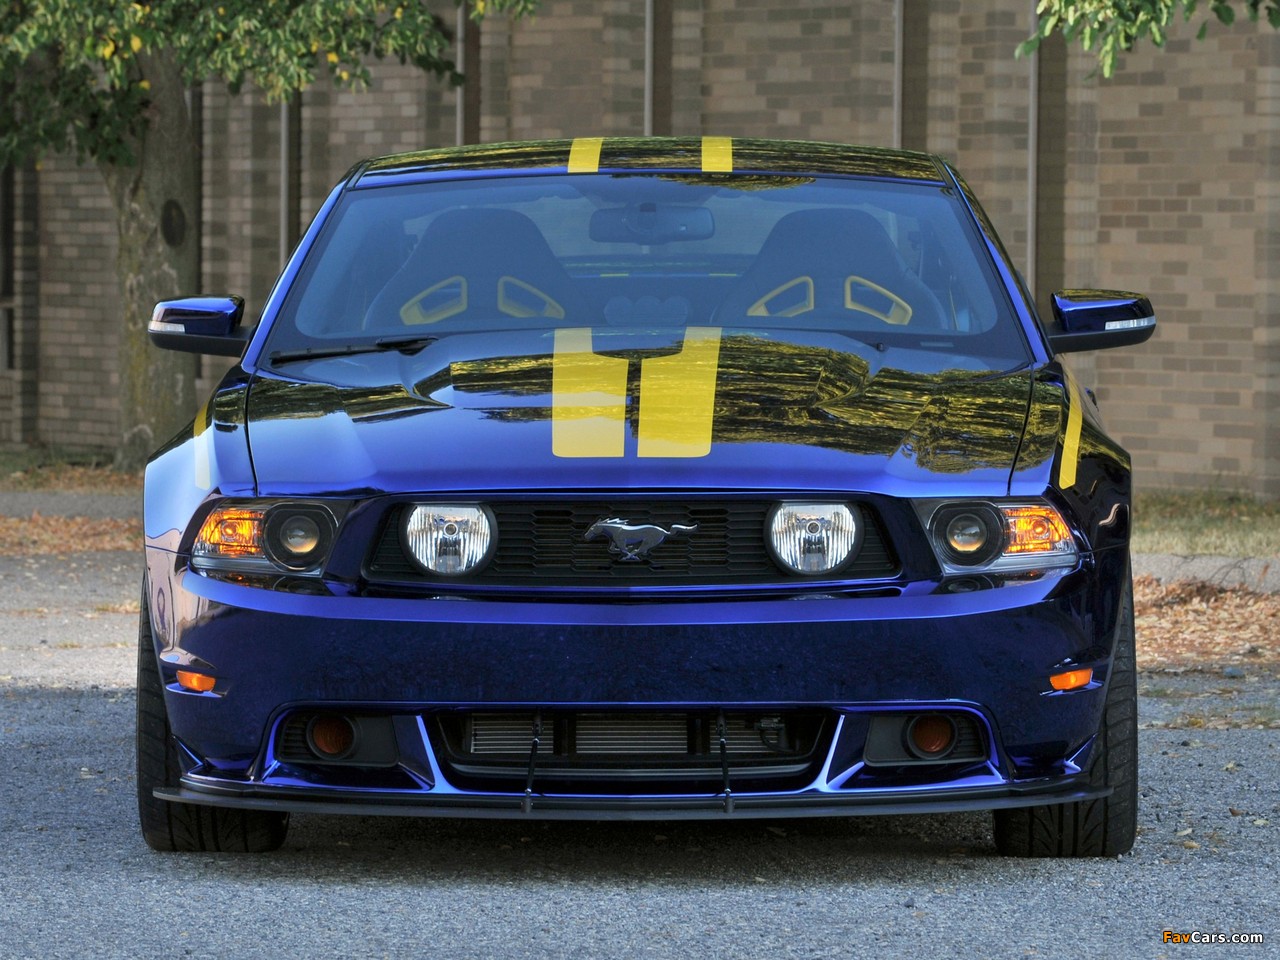 Mustang GT Blue Angels 2011 pictures (1280 x 960)